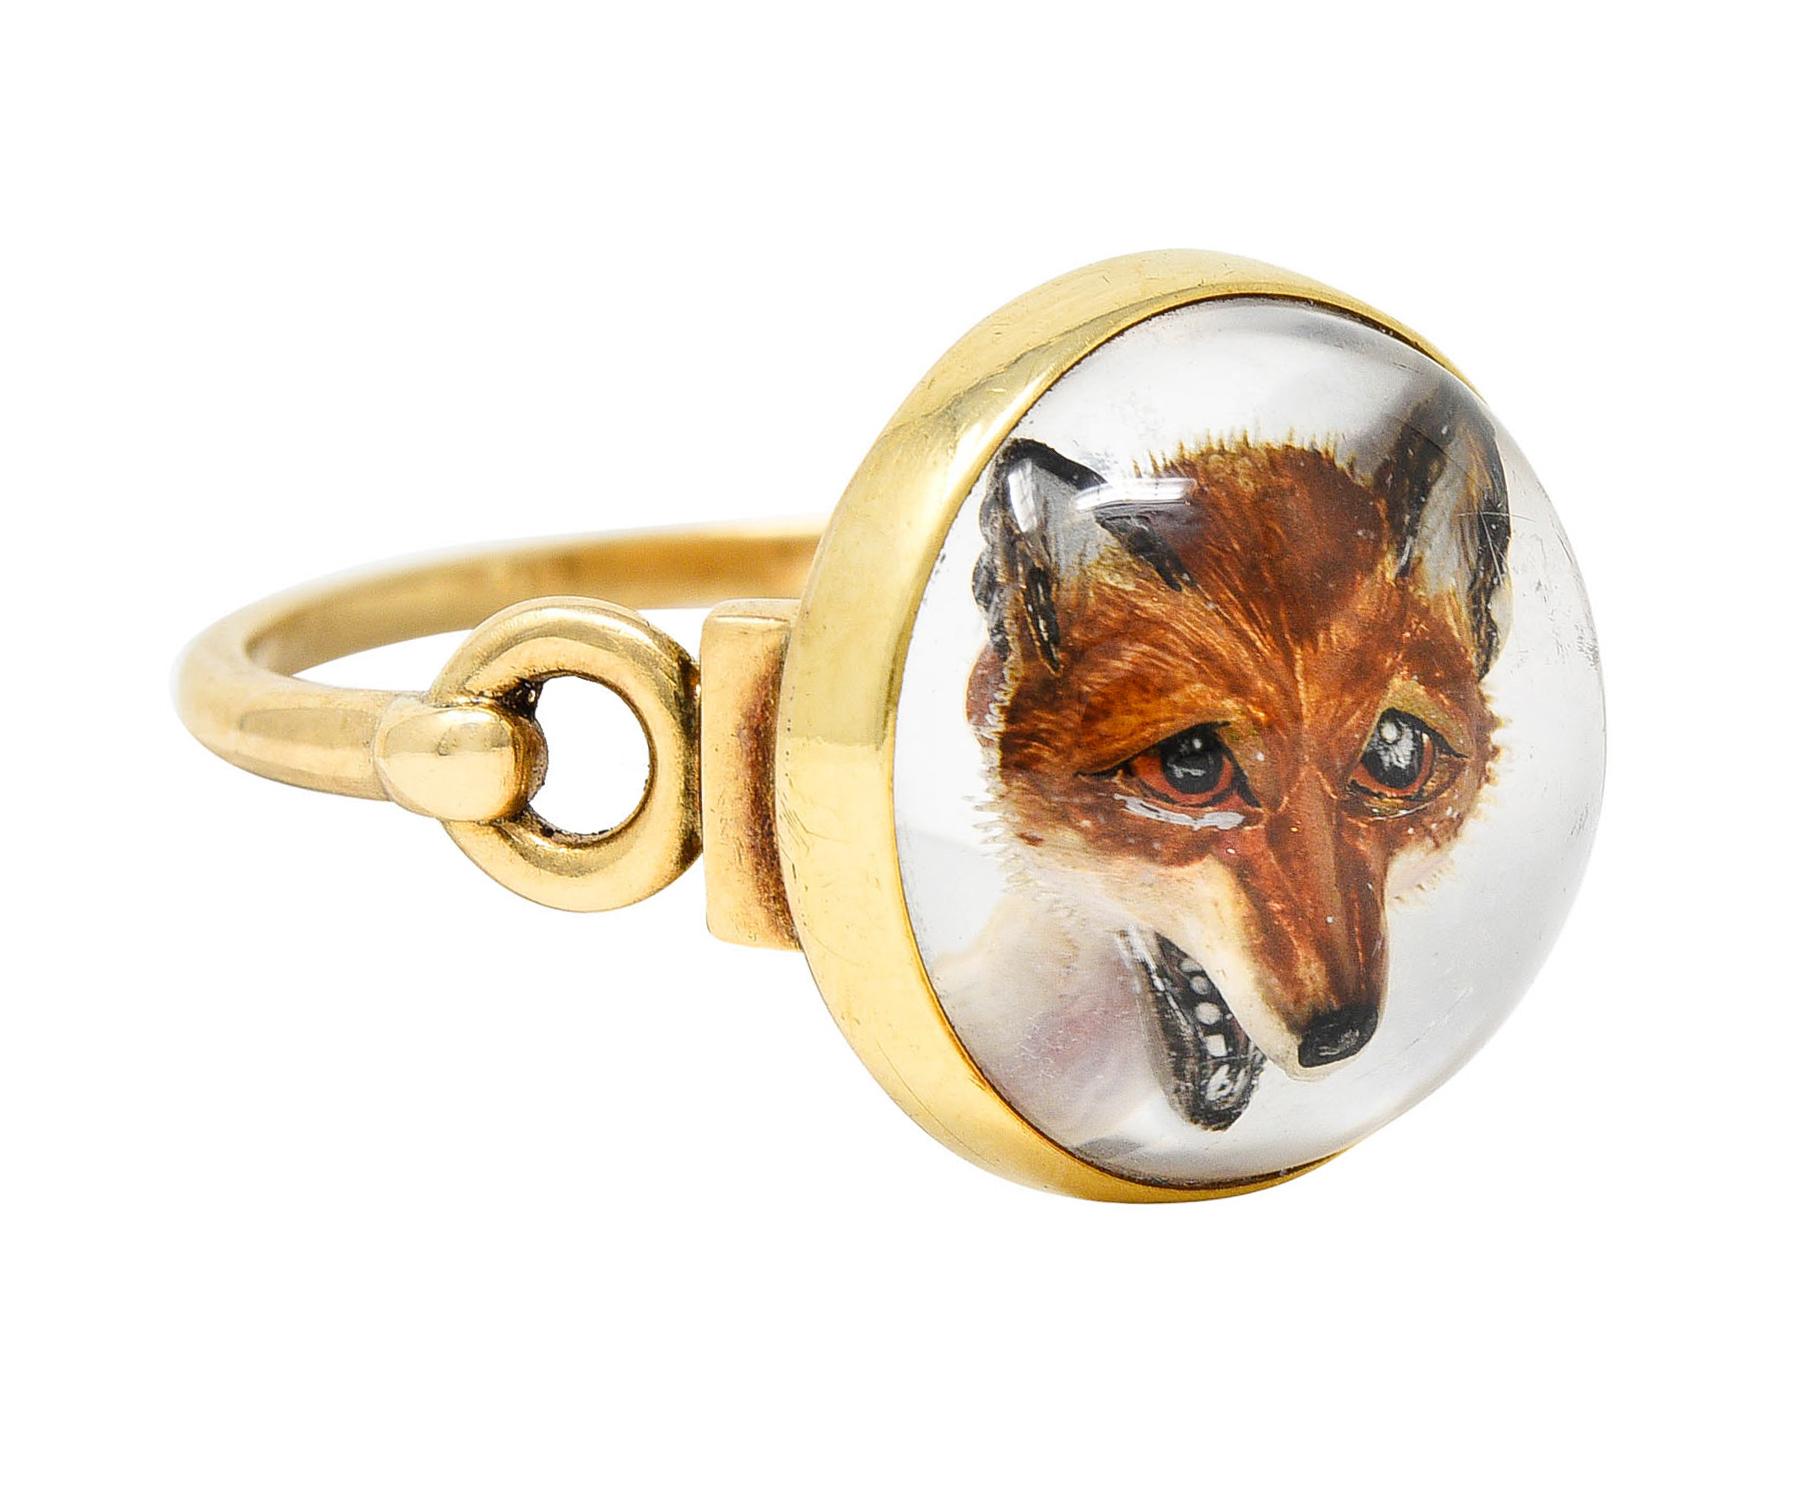 Featuring a 13.5 mm round and domed rock crystal quartz cabochon

Reverse carved to depict a dimensional rendering of a fox - hand painted in high detail

And backed by white mother-of-pearl with moderate but broad iridescent sheen

Bezel set and